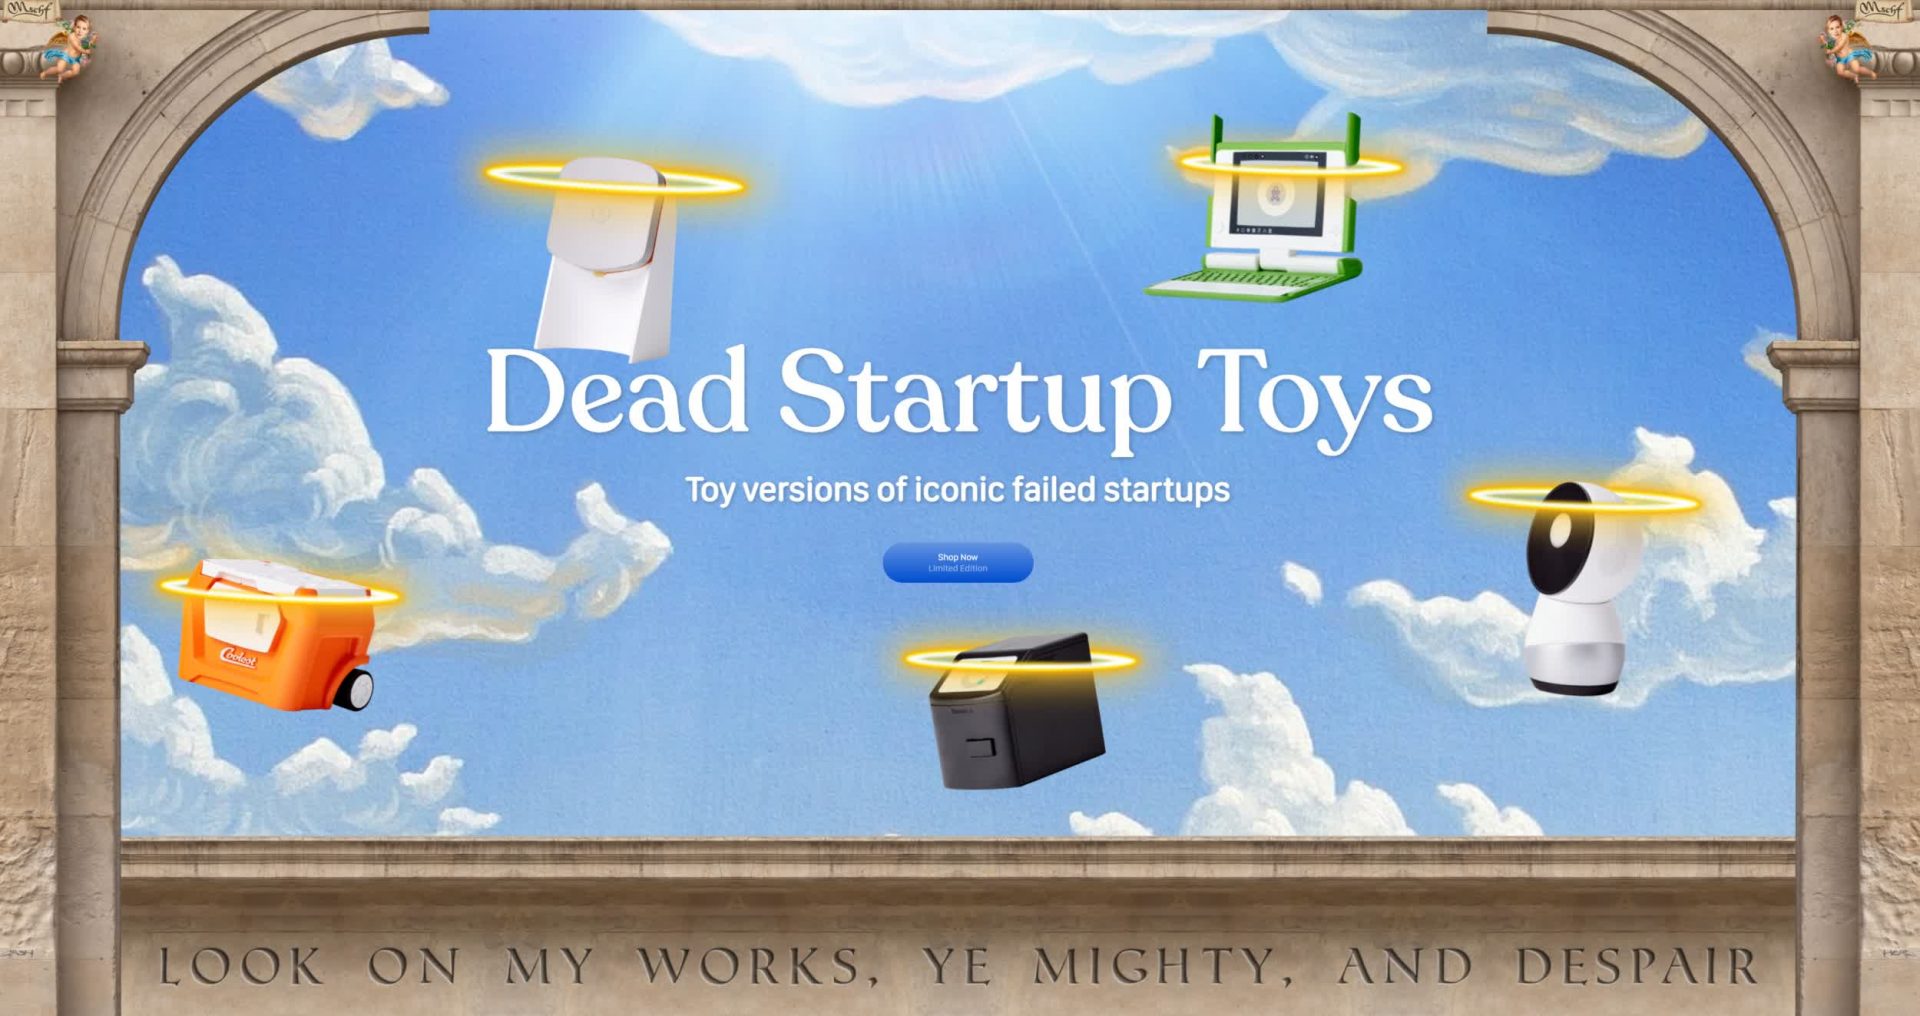 Plain Startup Toys are small versions of failed startups